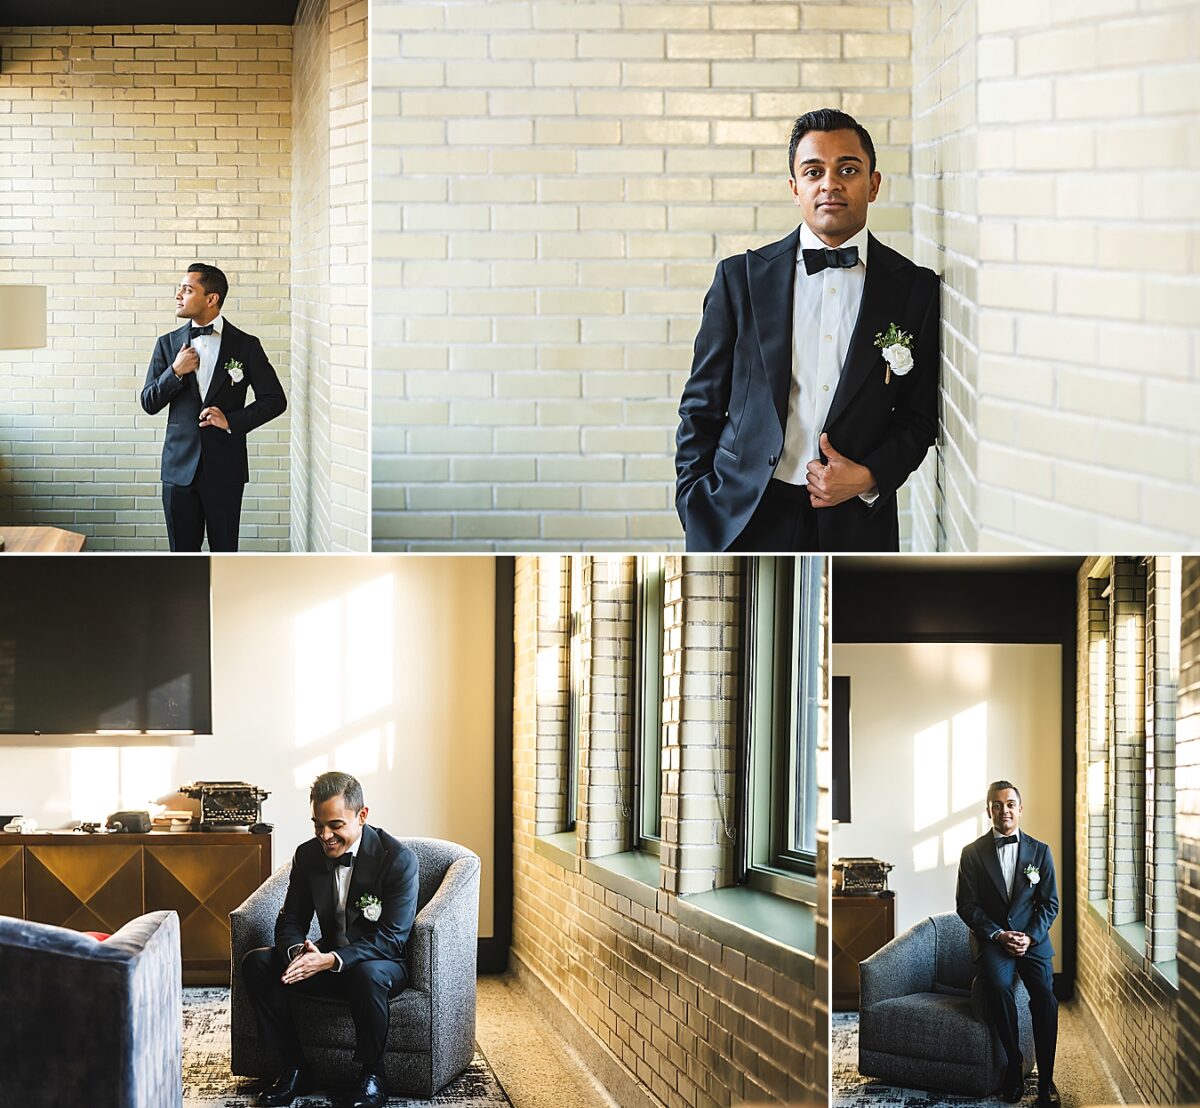 Bottleworks Hotel Elopement | Indianapolis Elopement Photographers | casey and her camera